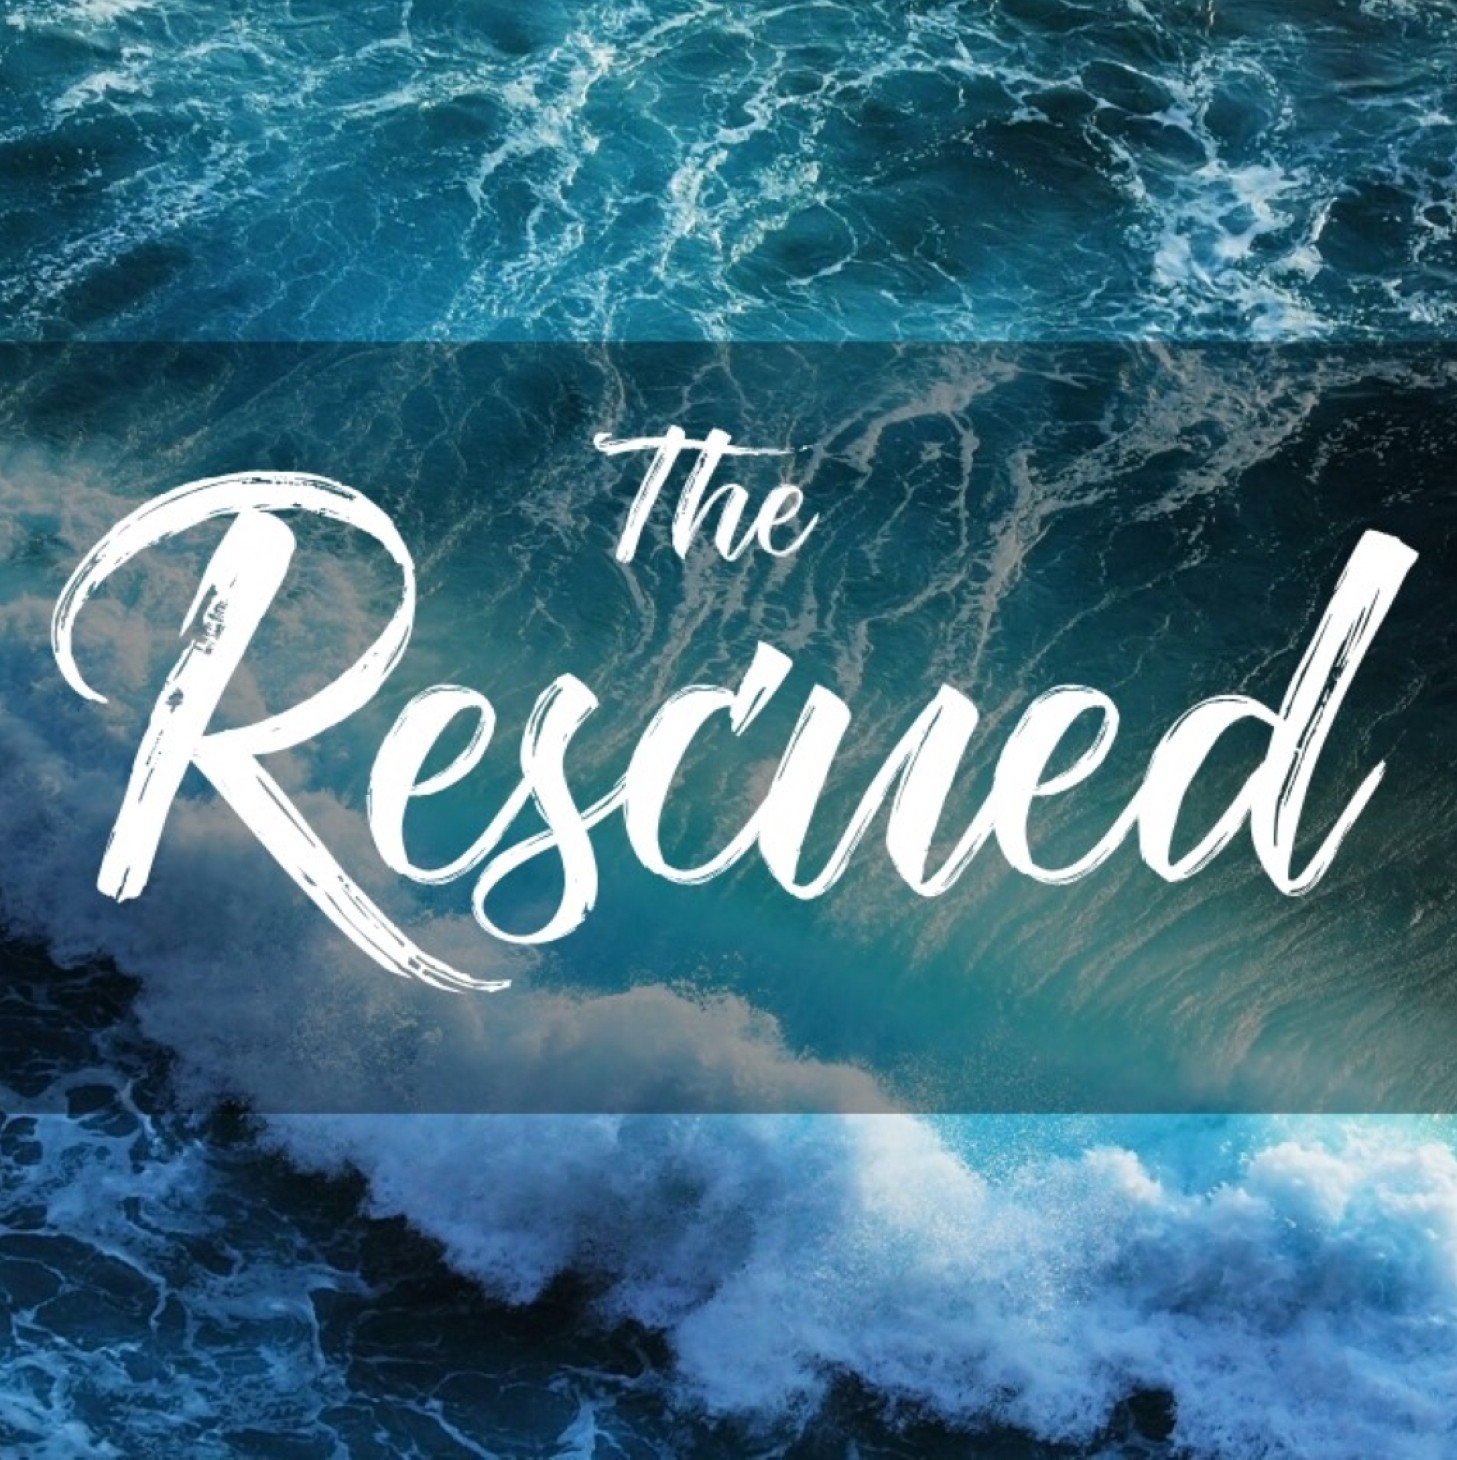 THE RESCUED RELEASES FIRST SINGLE